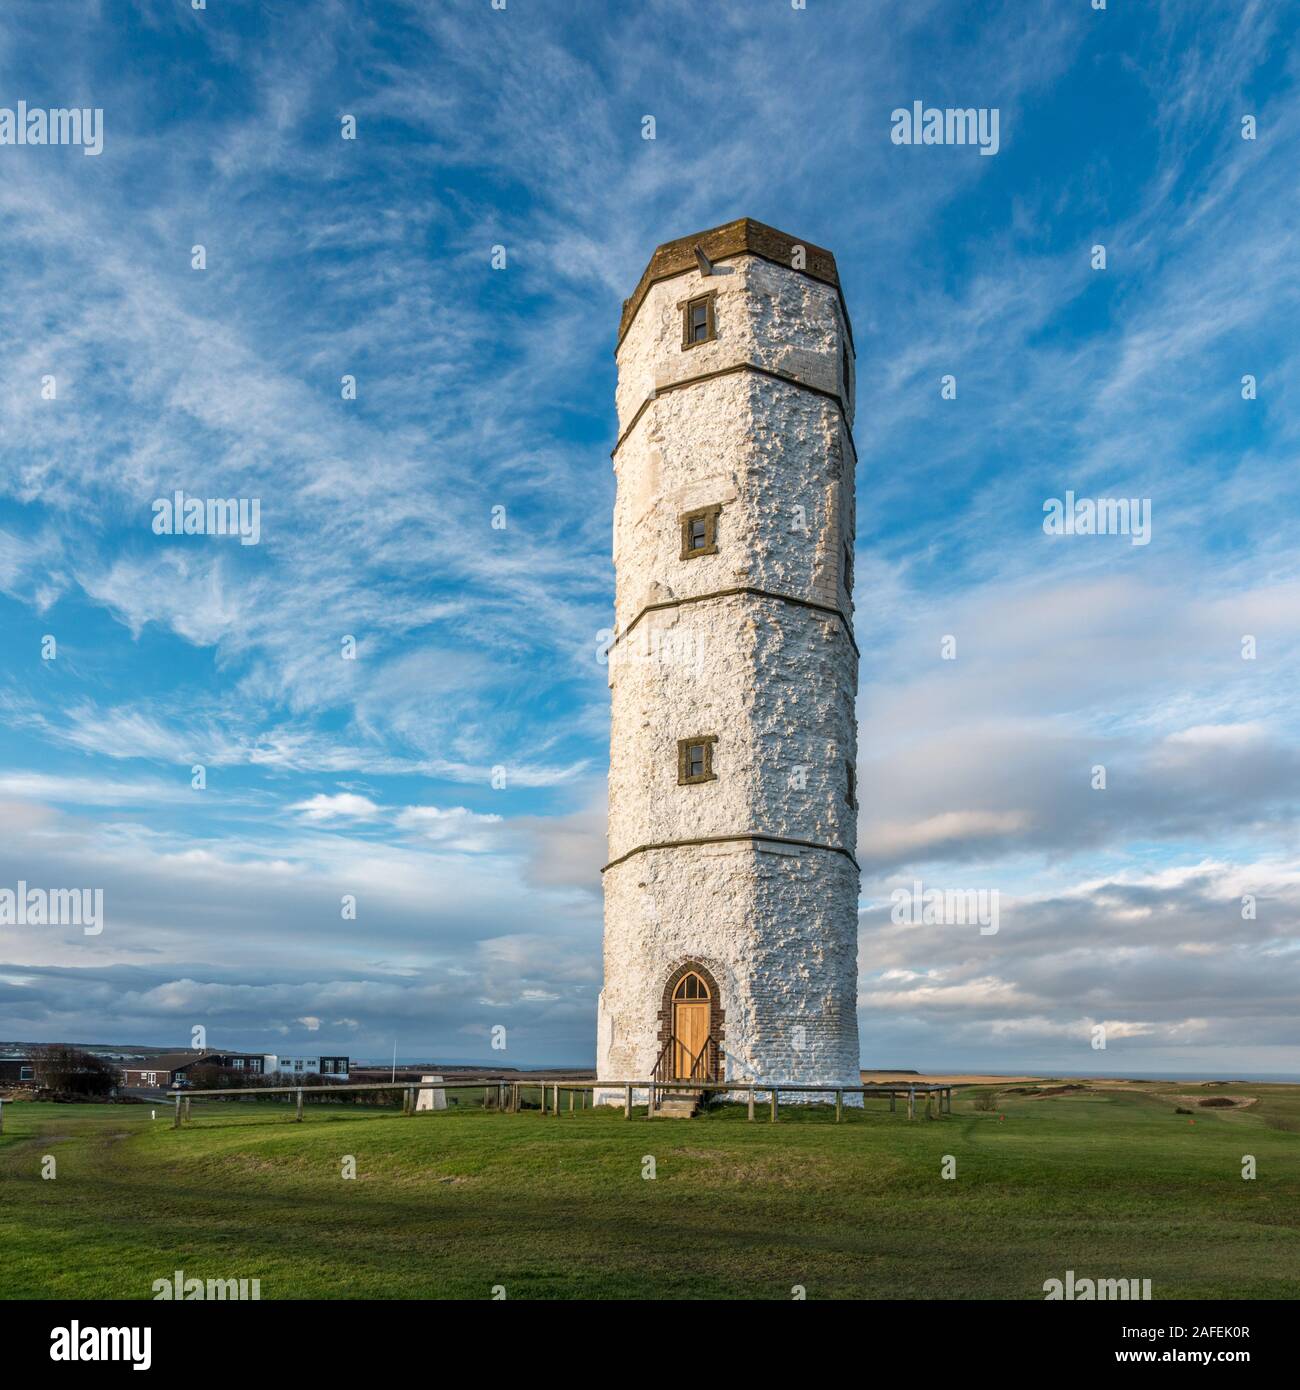 The old Chalk Tower listed building at Flamborough Head with a stunning sky backdrop, East Riding of Yorkshire, UK Stock Photo